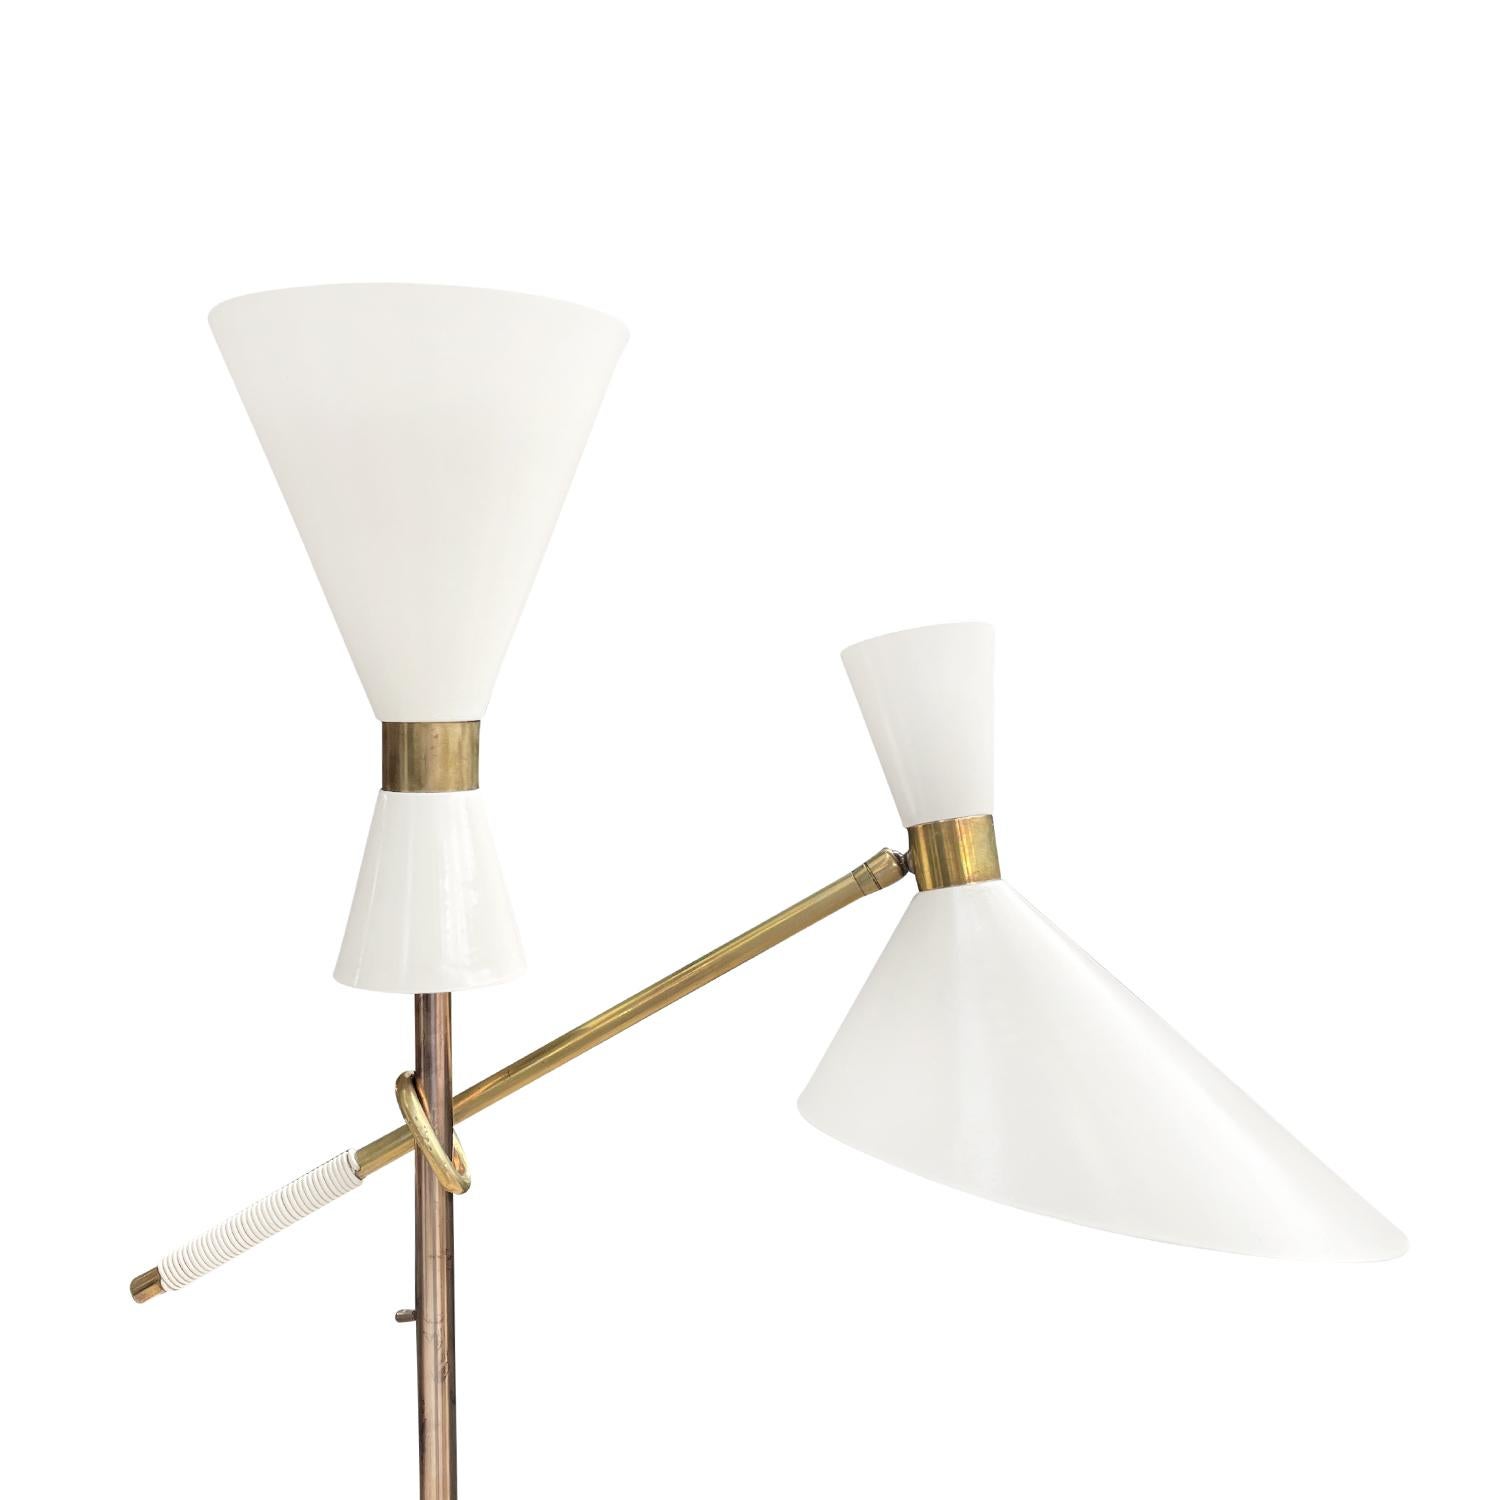 Lacquered 20th Century Austrian Polished Brass Reading Floor Lamp by Julius Theodor Kalmar